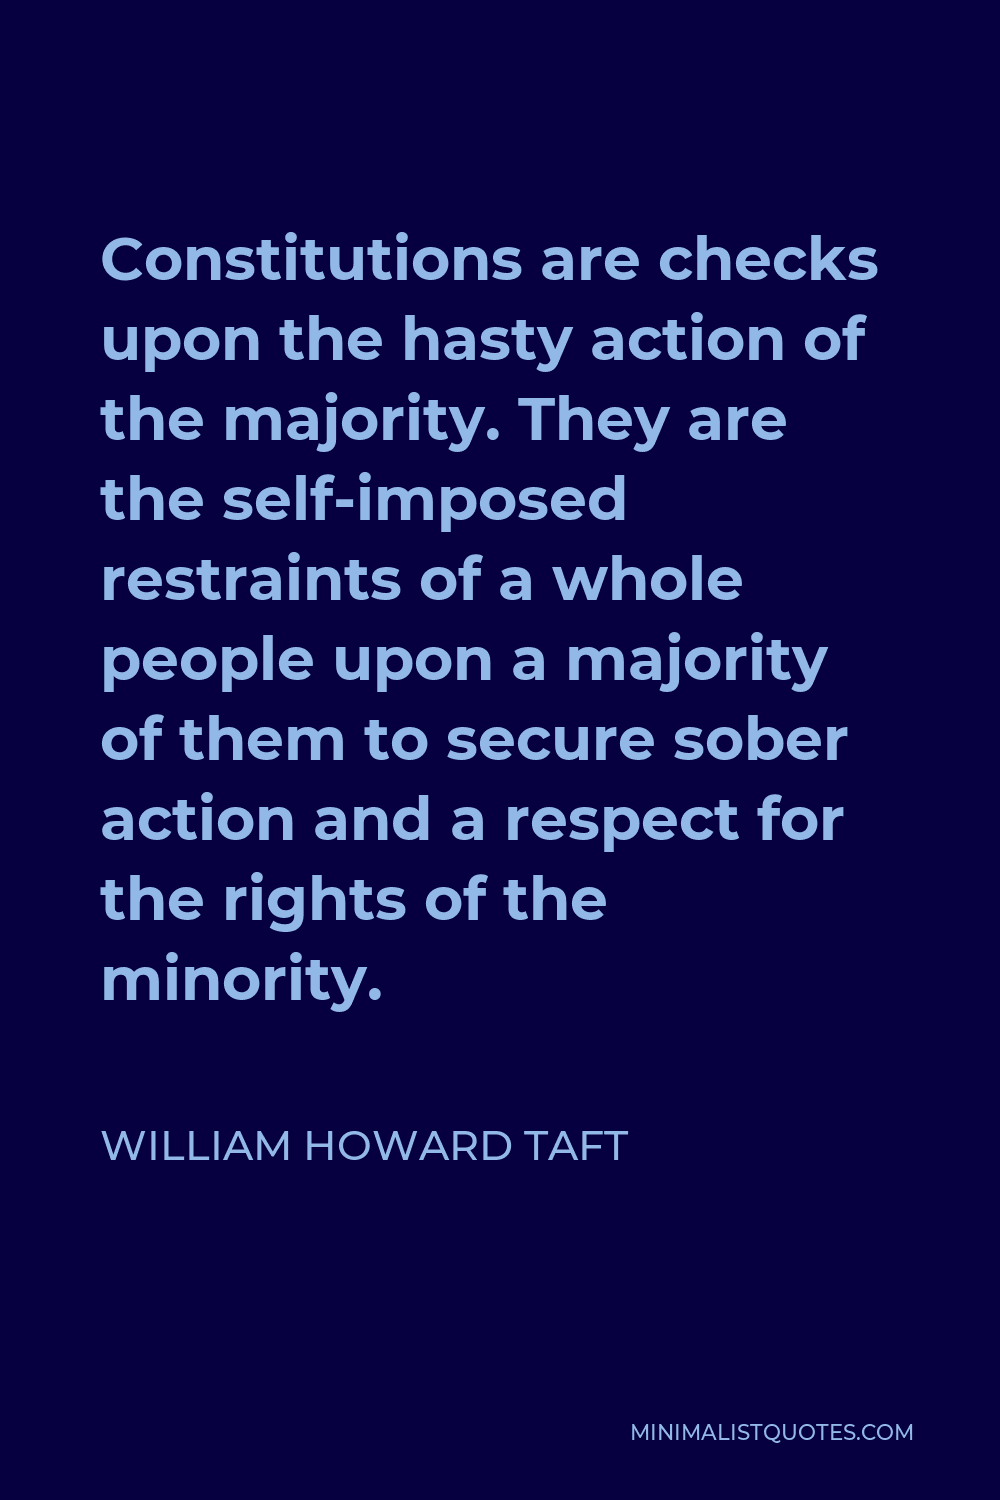 William Howard Taft Quote - Constitutions are checks upon the hasty action of the majority. They are the self-imposed restraints of a whole people upon a majority of them to secure sober action and a respect for the rights of the minority.